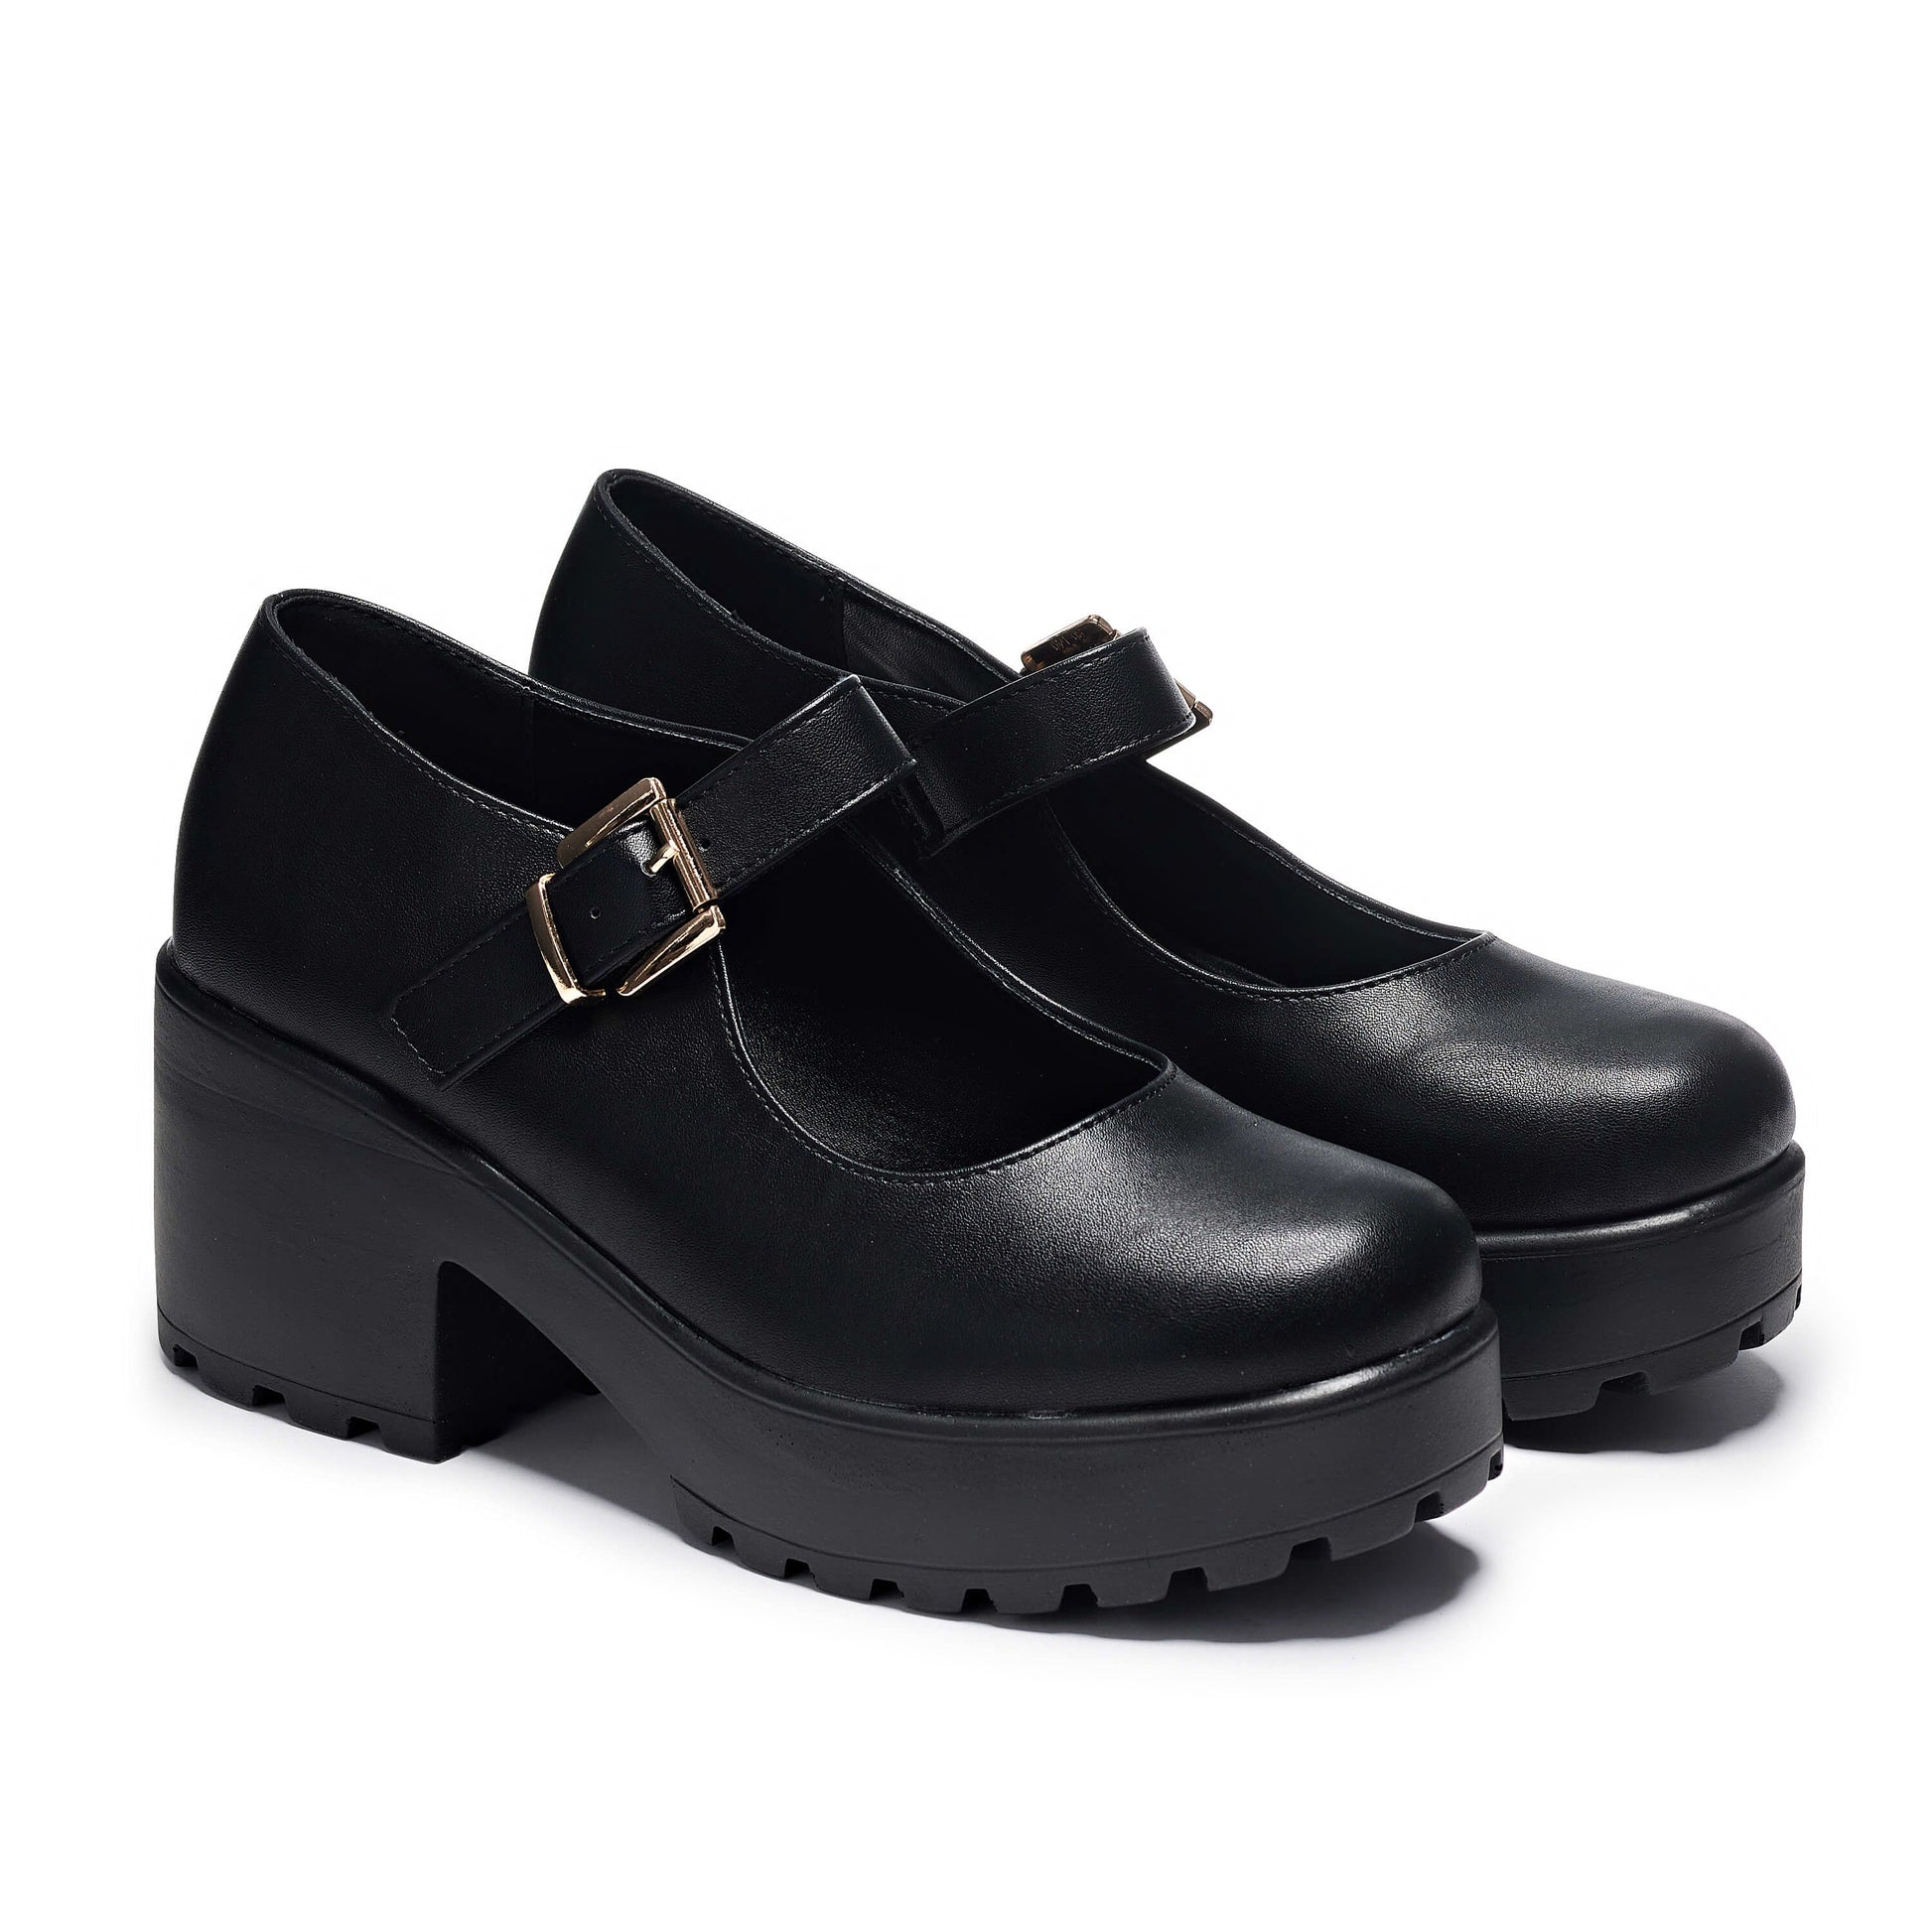 Tira Mary Jane Shoes 'Faux Leather Edition' - Mary Janes - KOI Footwear - Black - Three-Quarter View